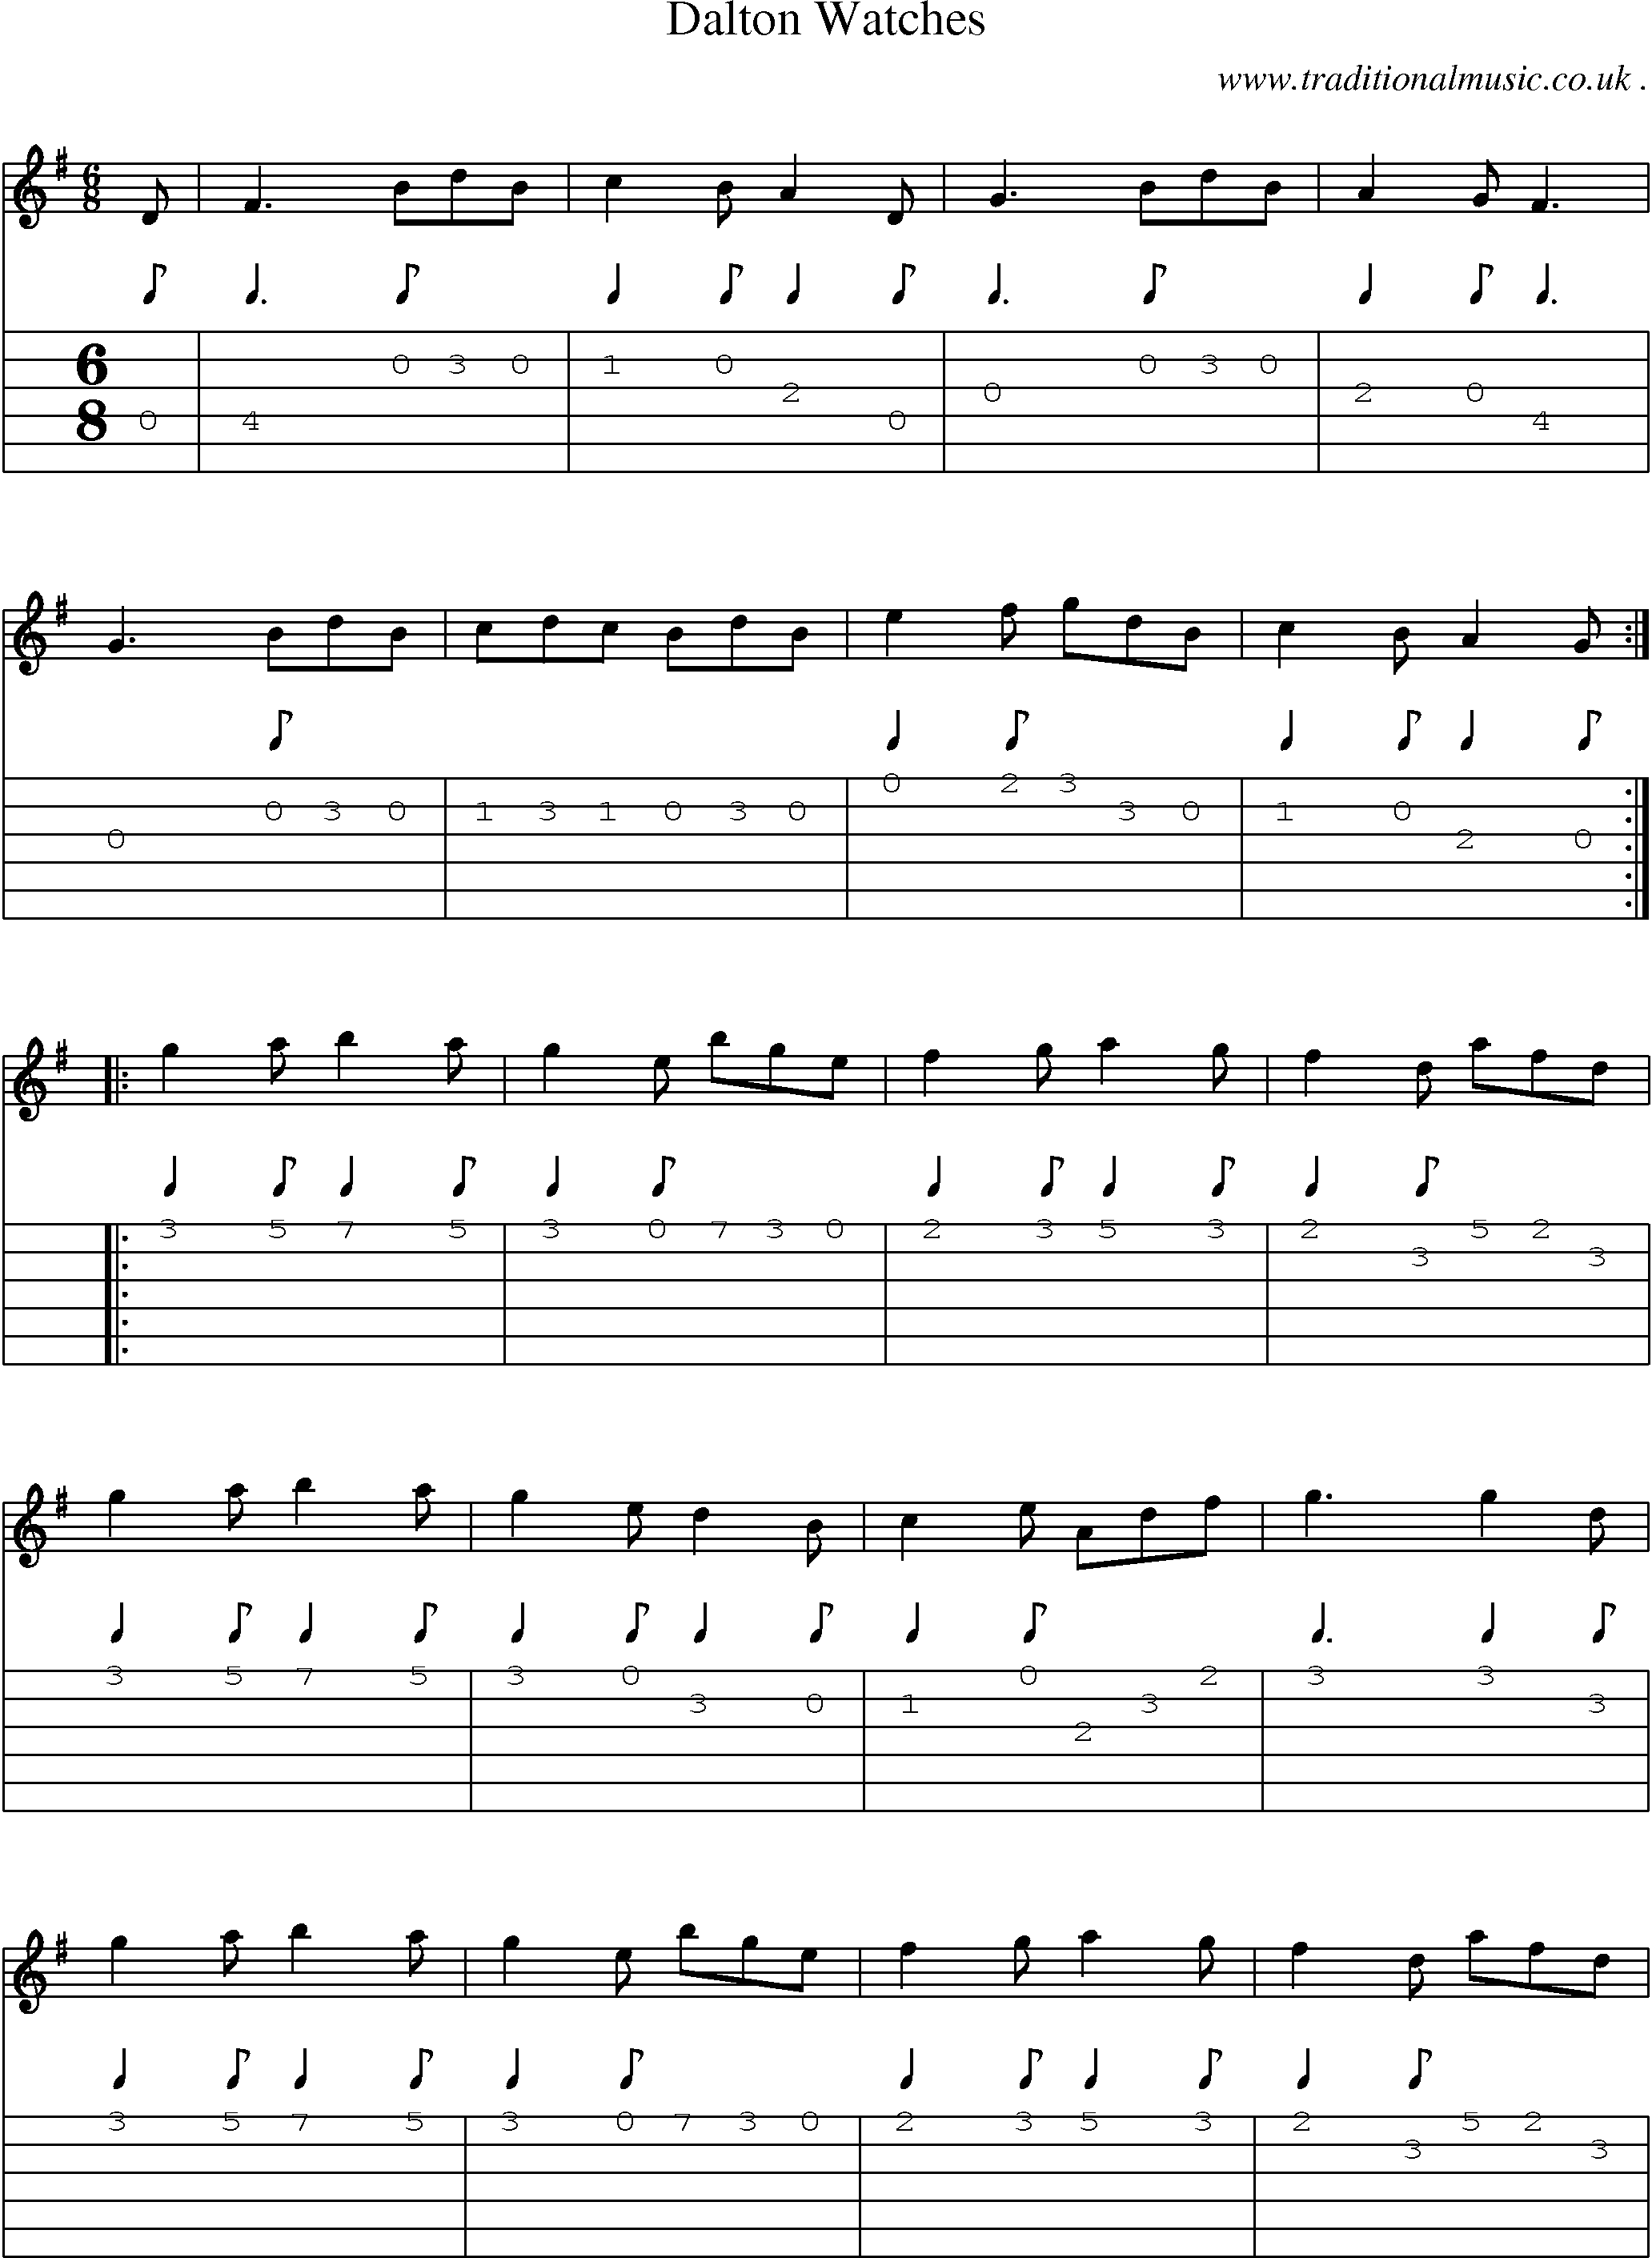 Sheet-Music and Guitar Tabs for Dalton Watches